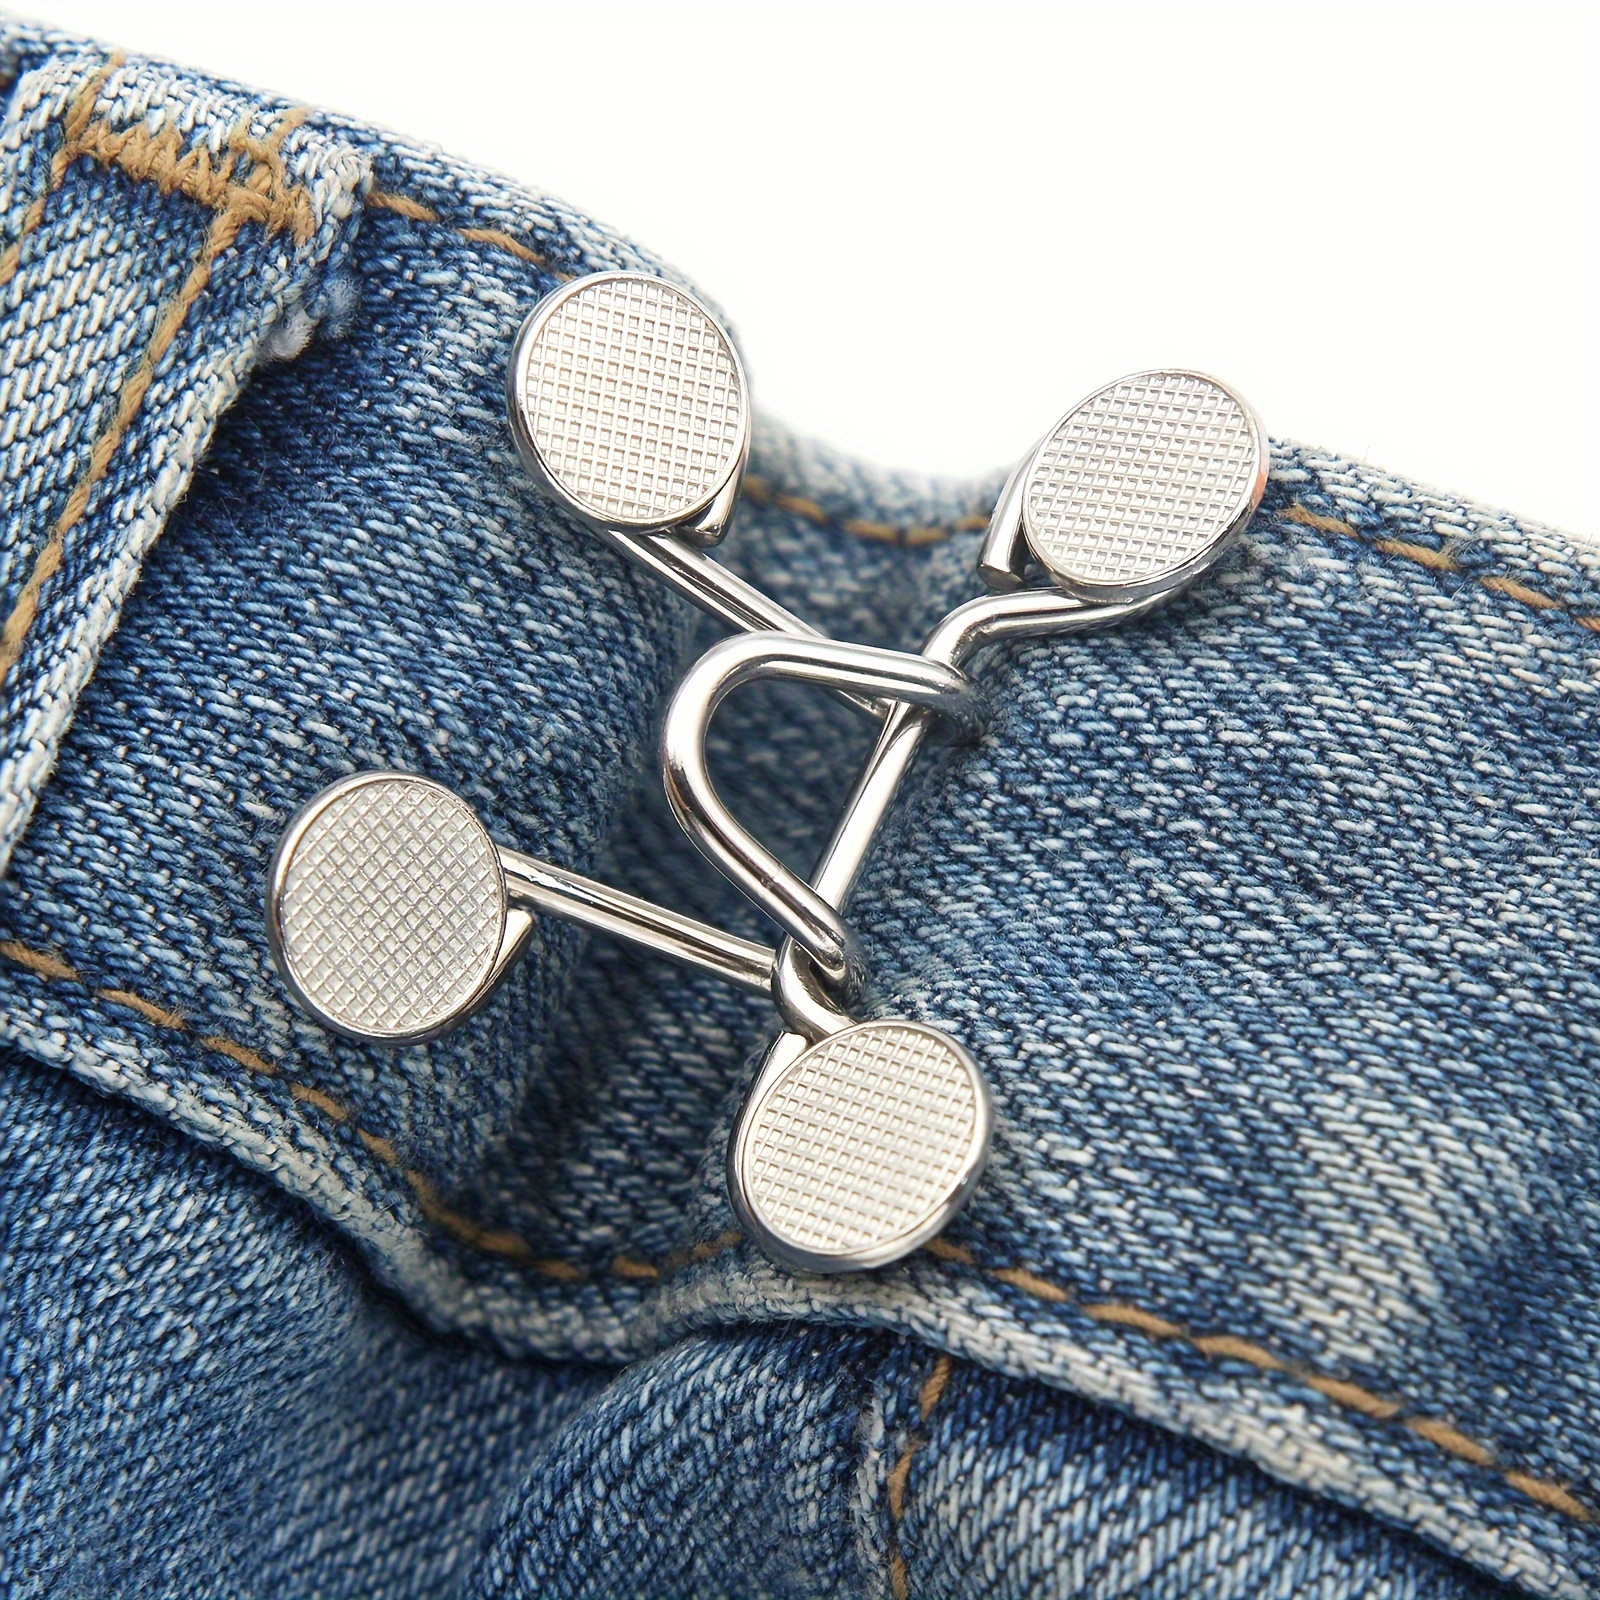 How To Sew A Button On Pantsadjustable Leather Waist Buckle - No Sewing  Required Pants Button